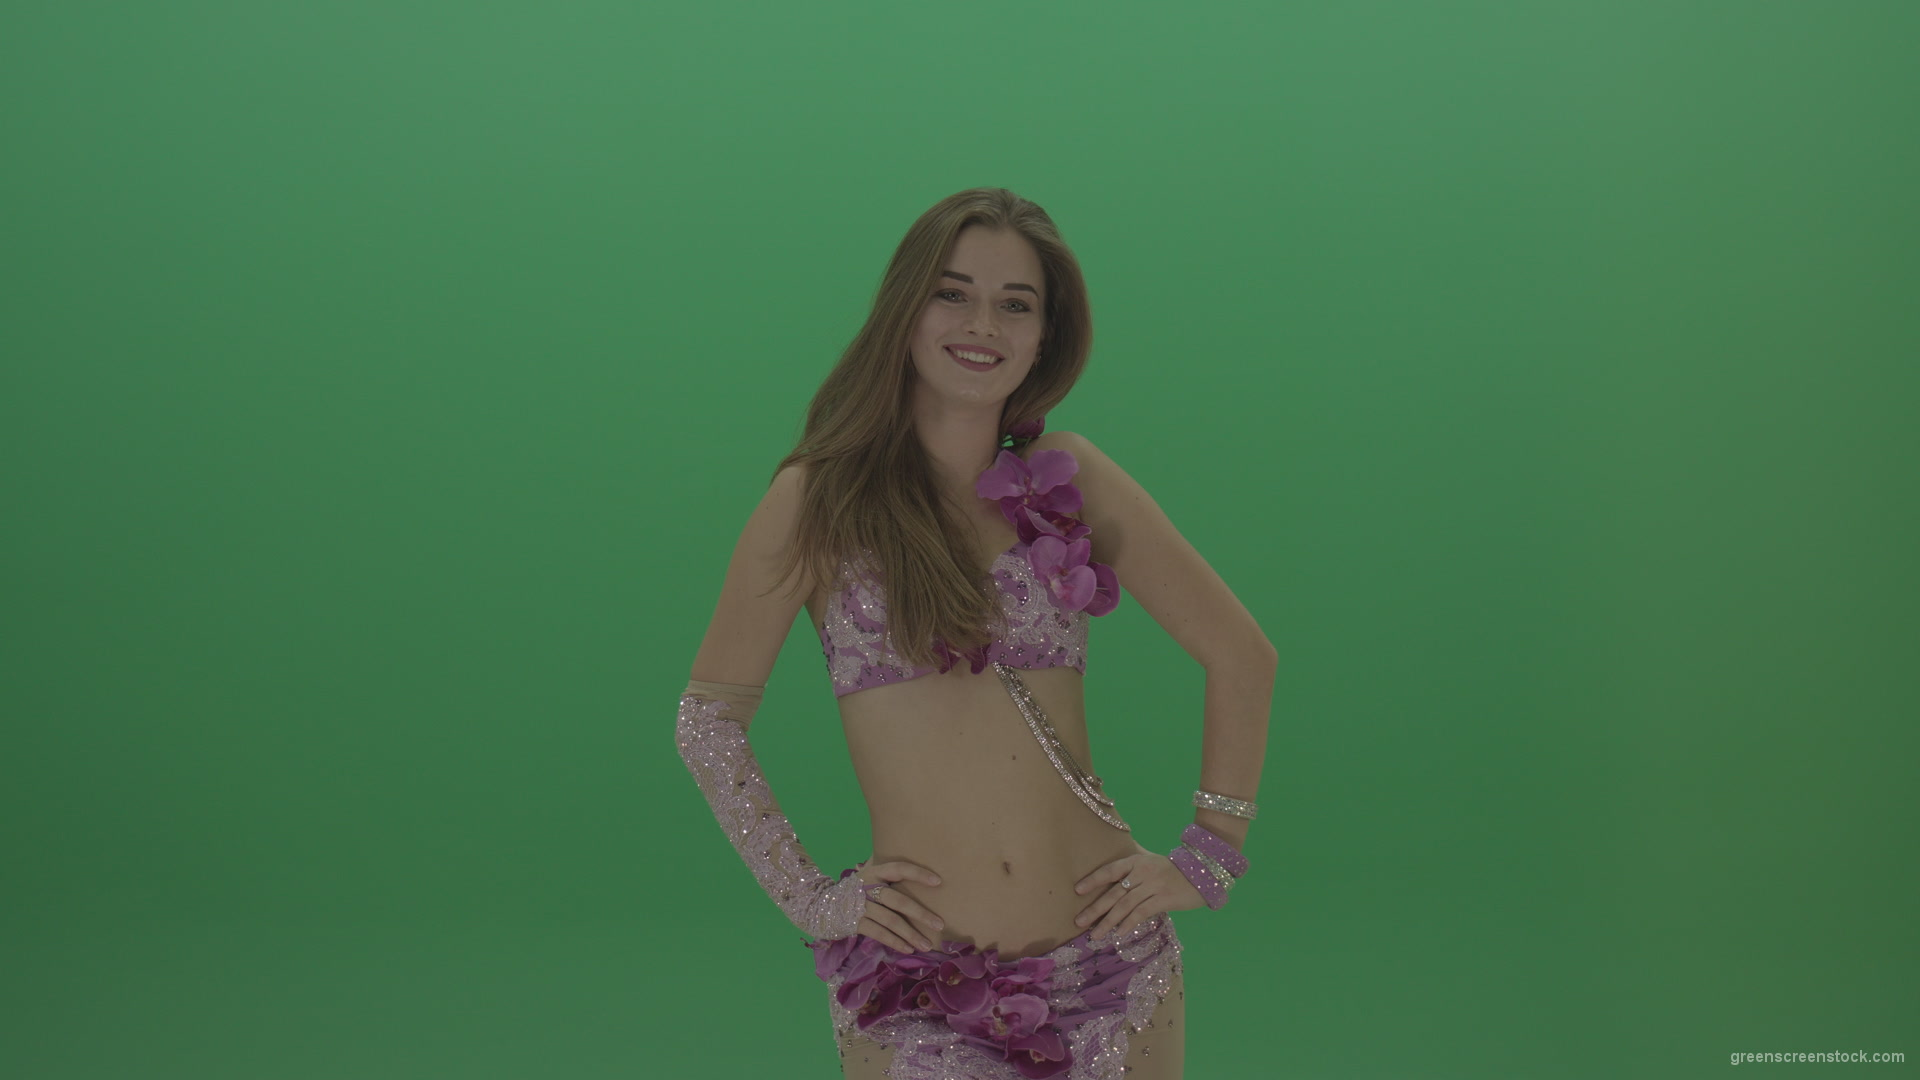 Beautiful-belly-dancer-in-purple-wear-winks-as-she-poses-over-green-screen-background_008 Green Screen Stock